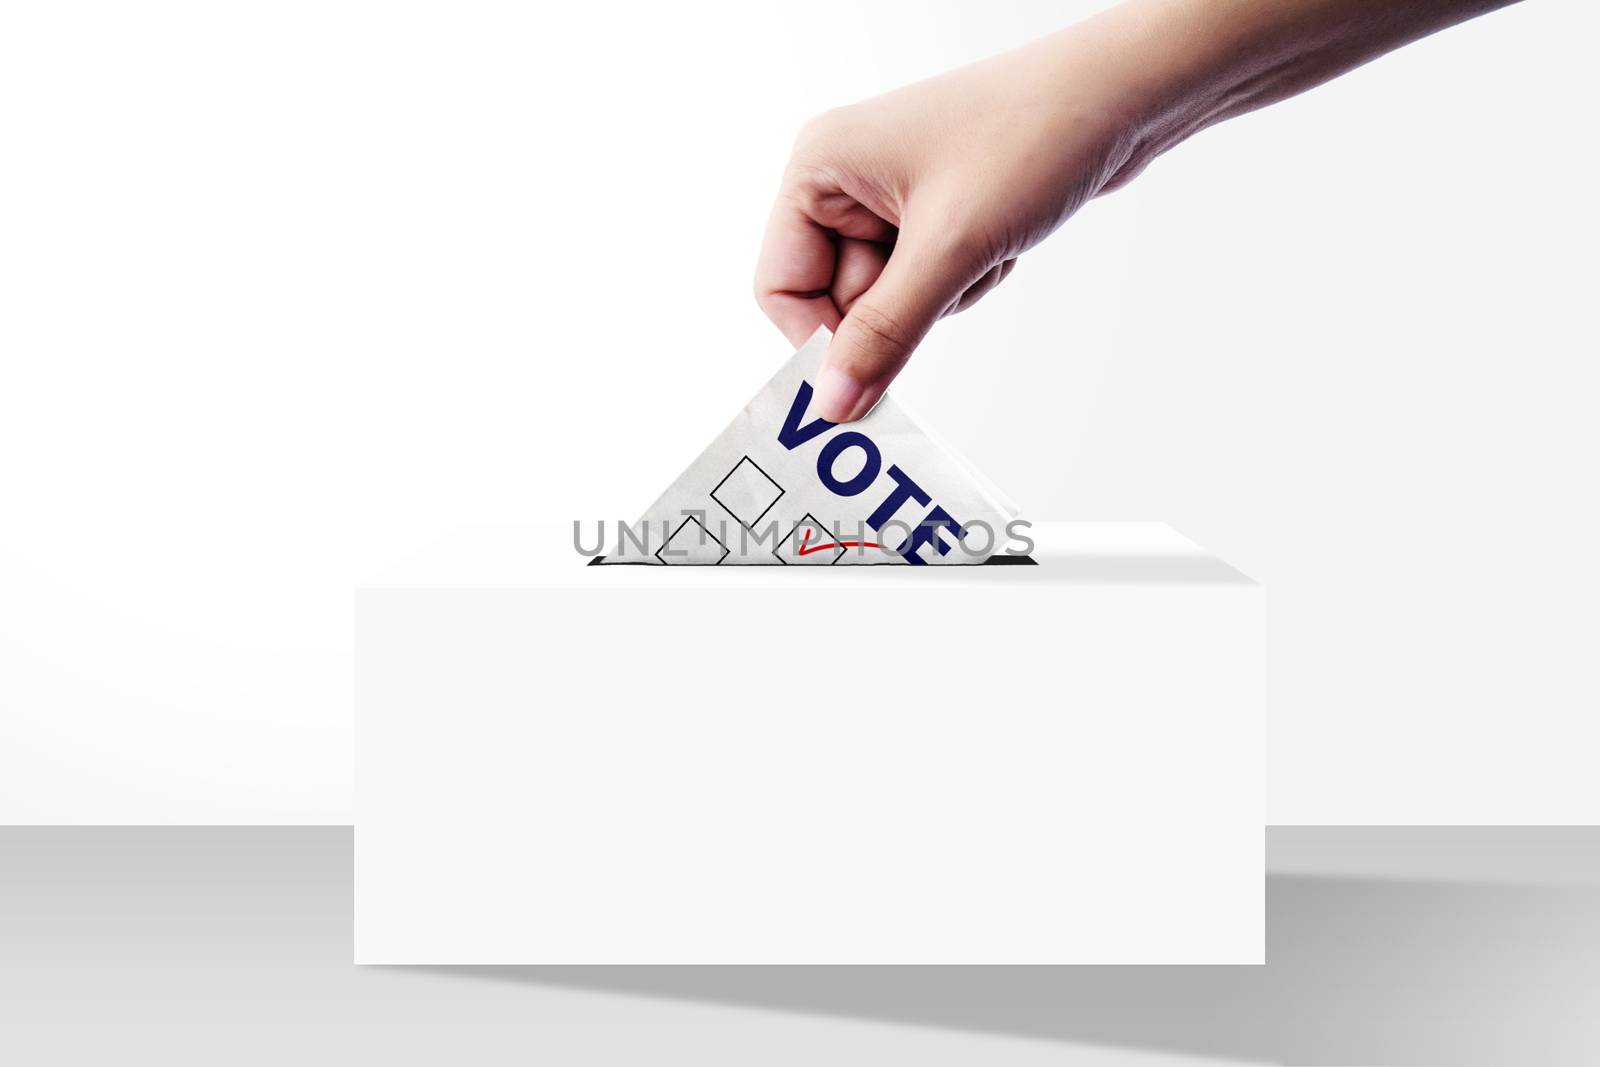 close up of hand holding voting paper for election vote into the ballot box on white background by asiandelight